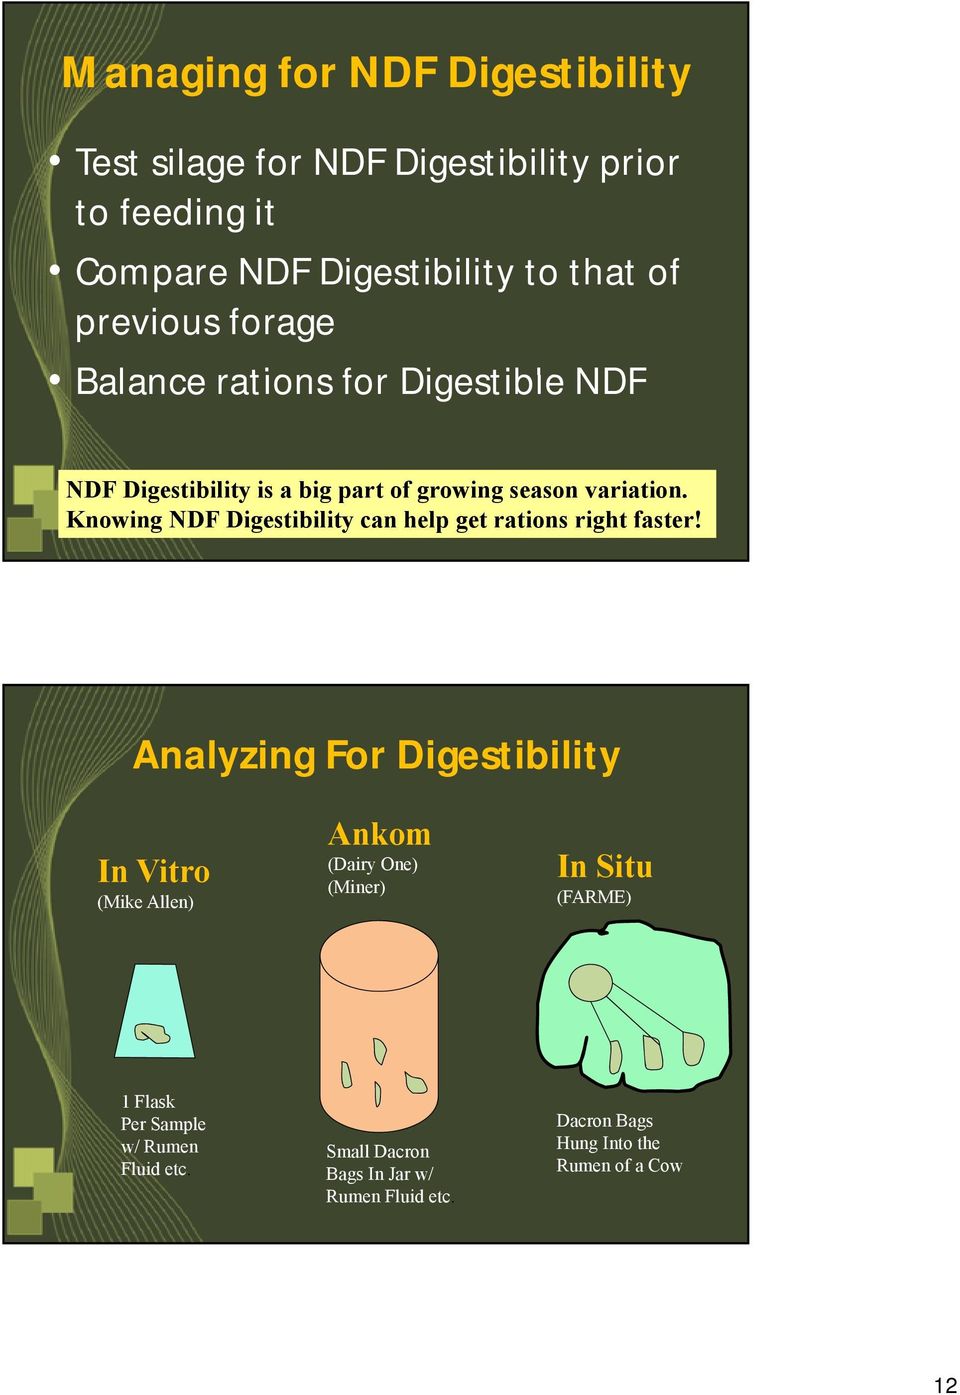 Knowing NDF Digestibility can help get rations right faster!